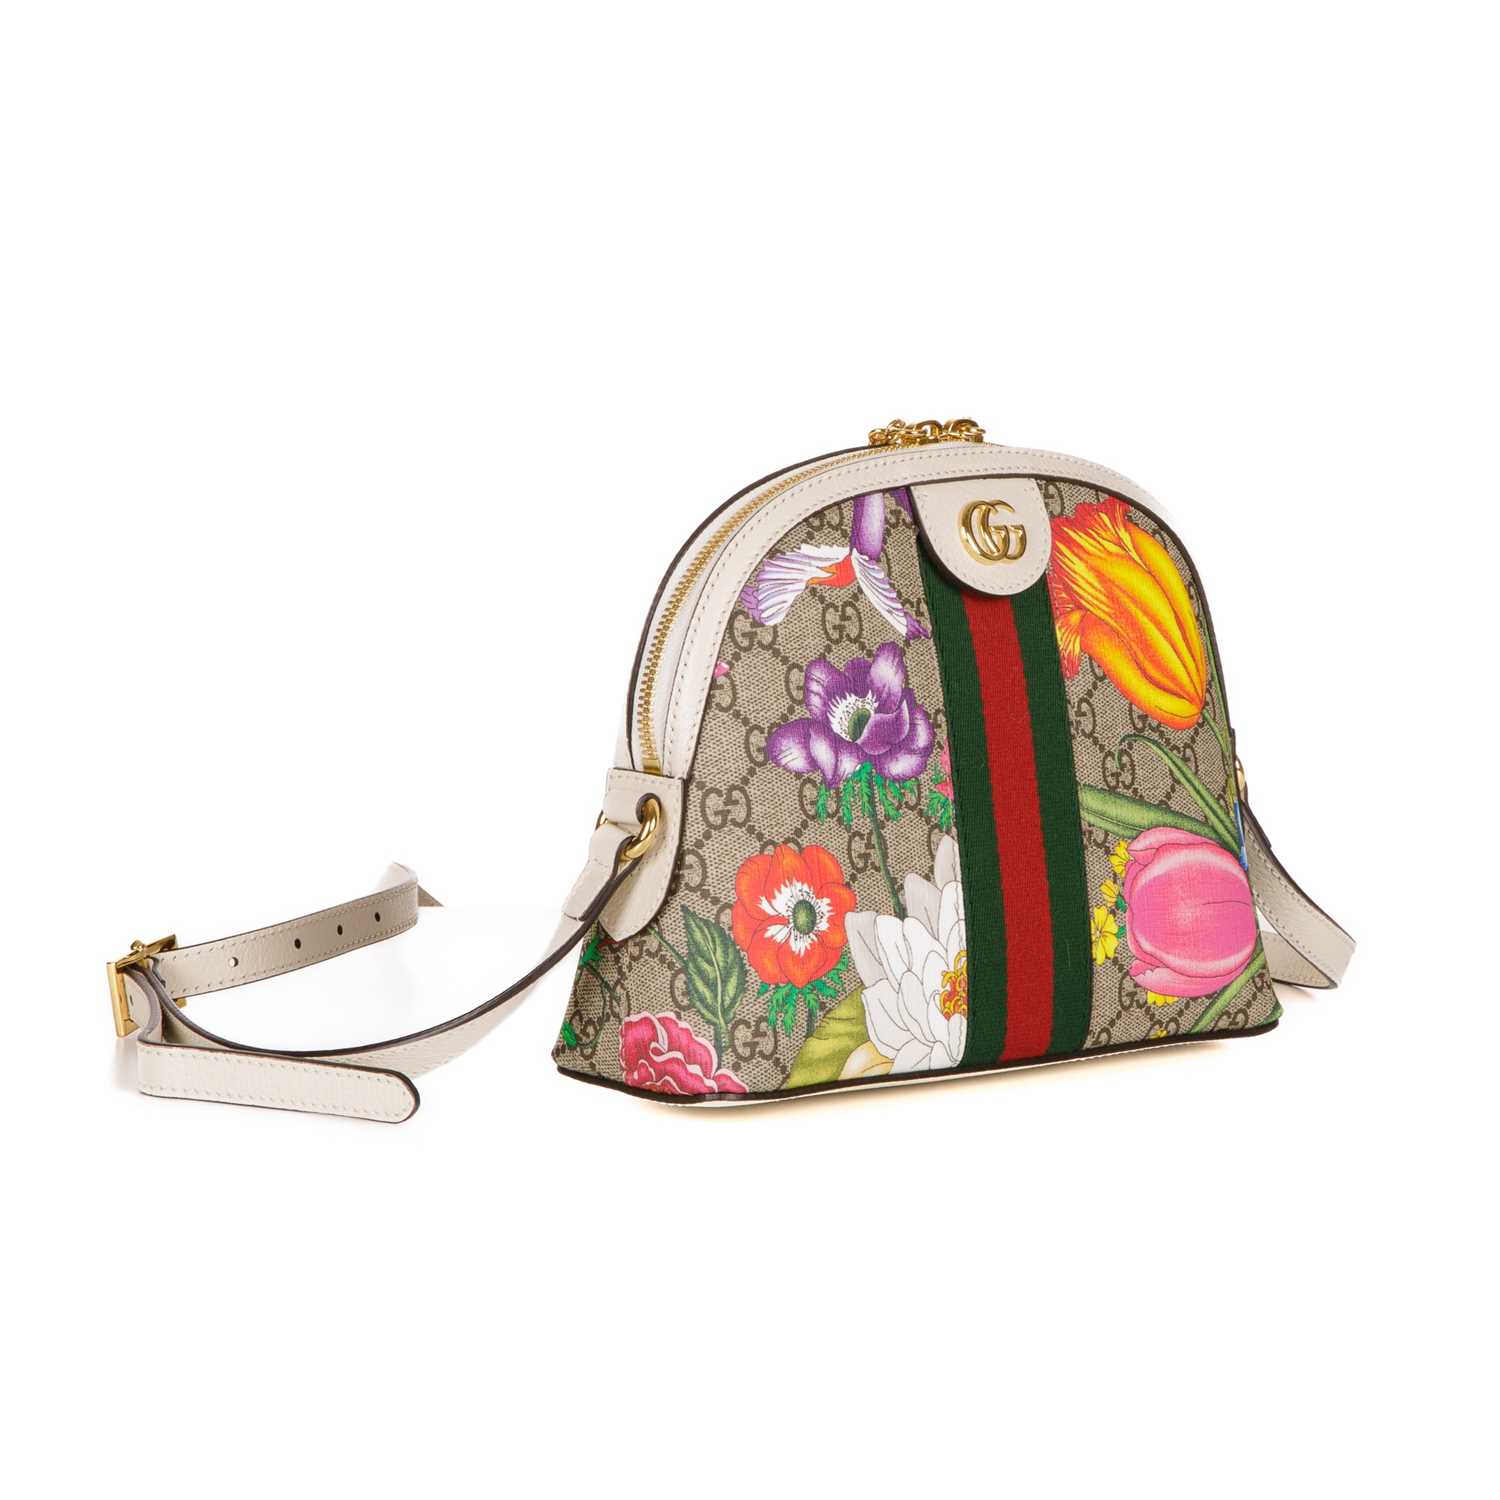 Gucci, a Supreme Floral Web Ophidia handbag, crafted from beige GG coated canvas, overlayed with - Image 3 of 4